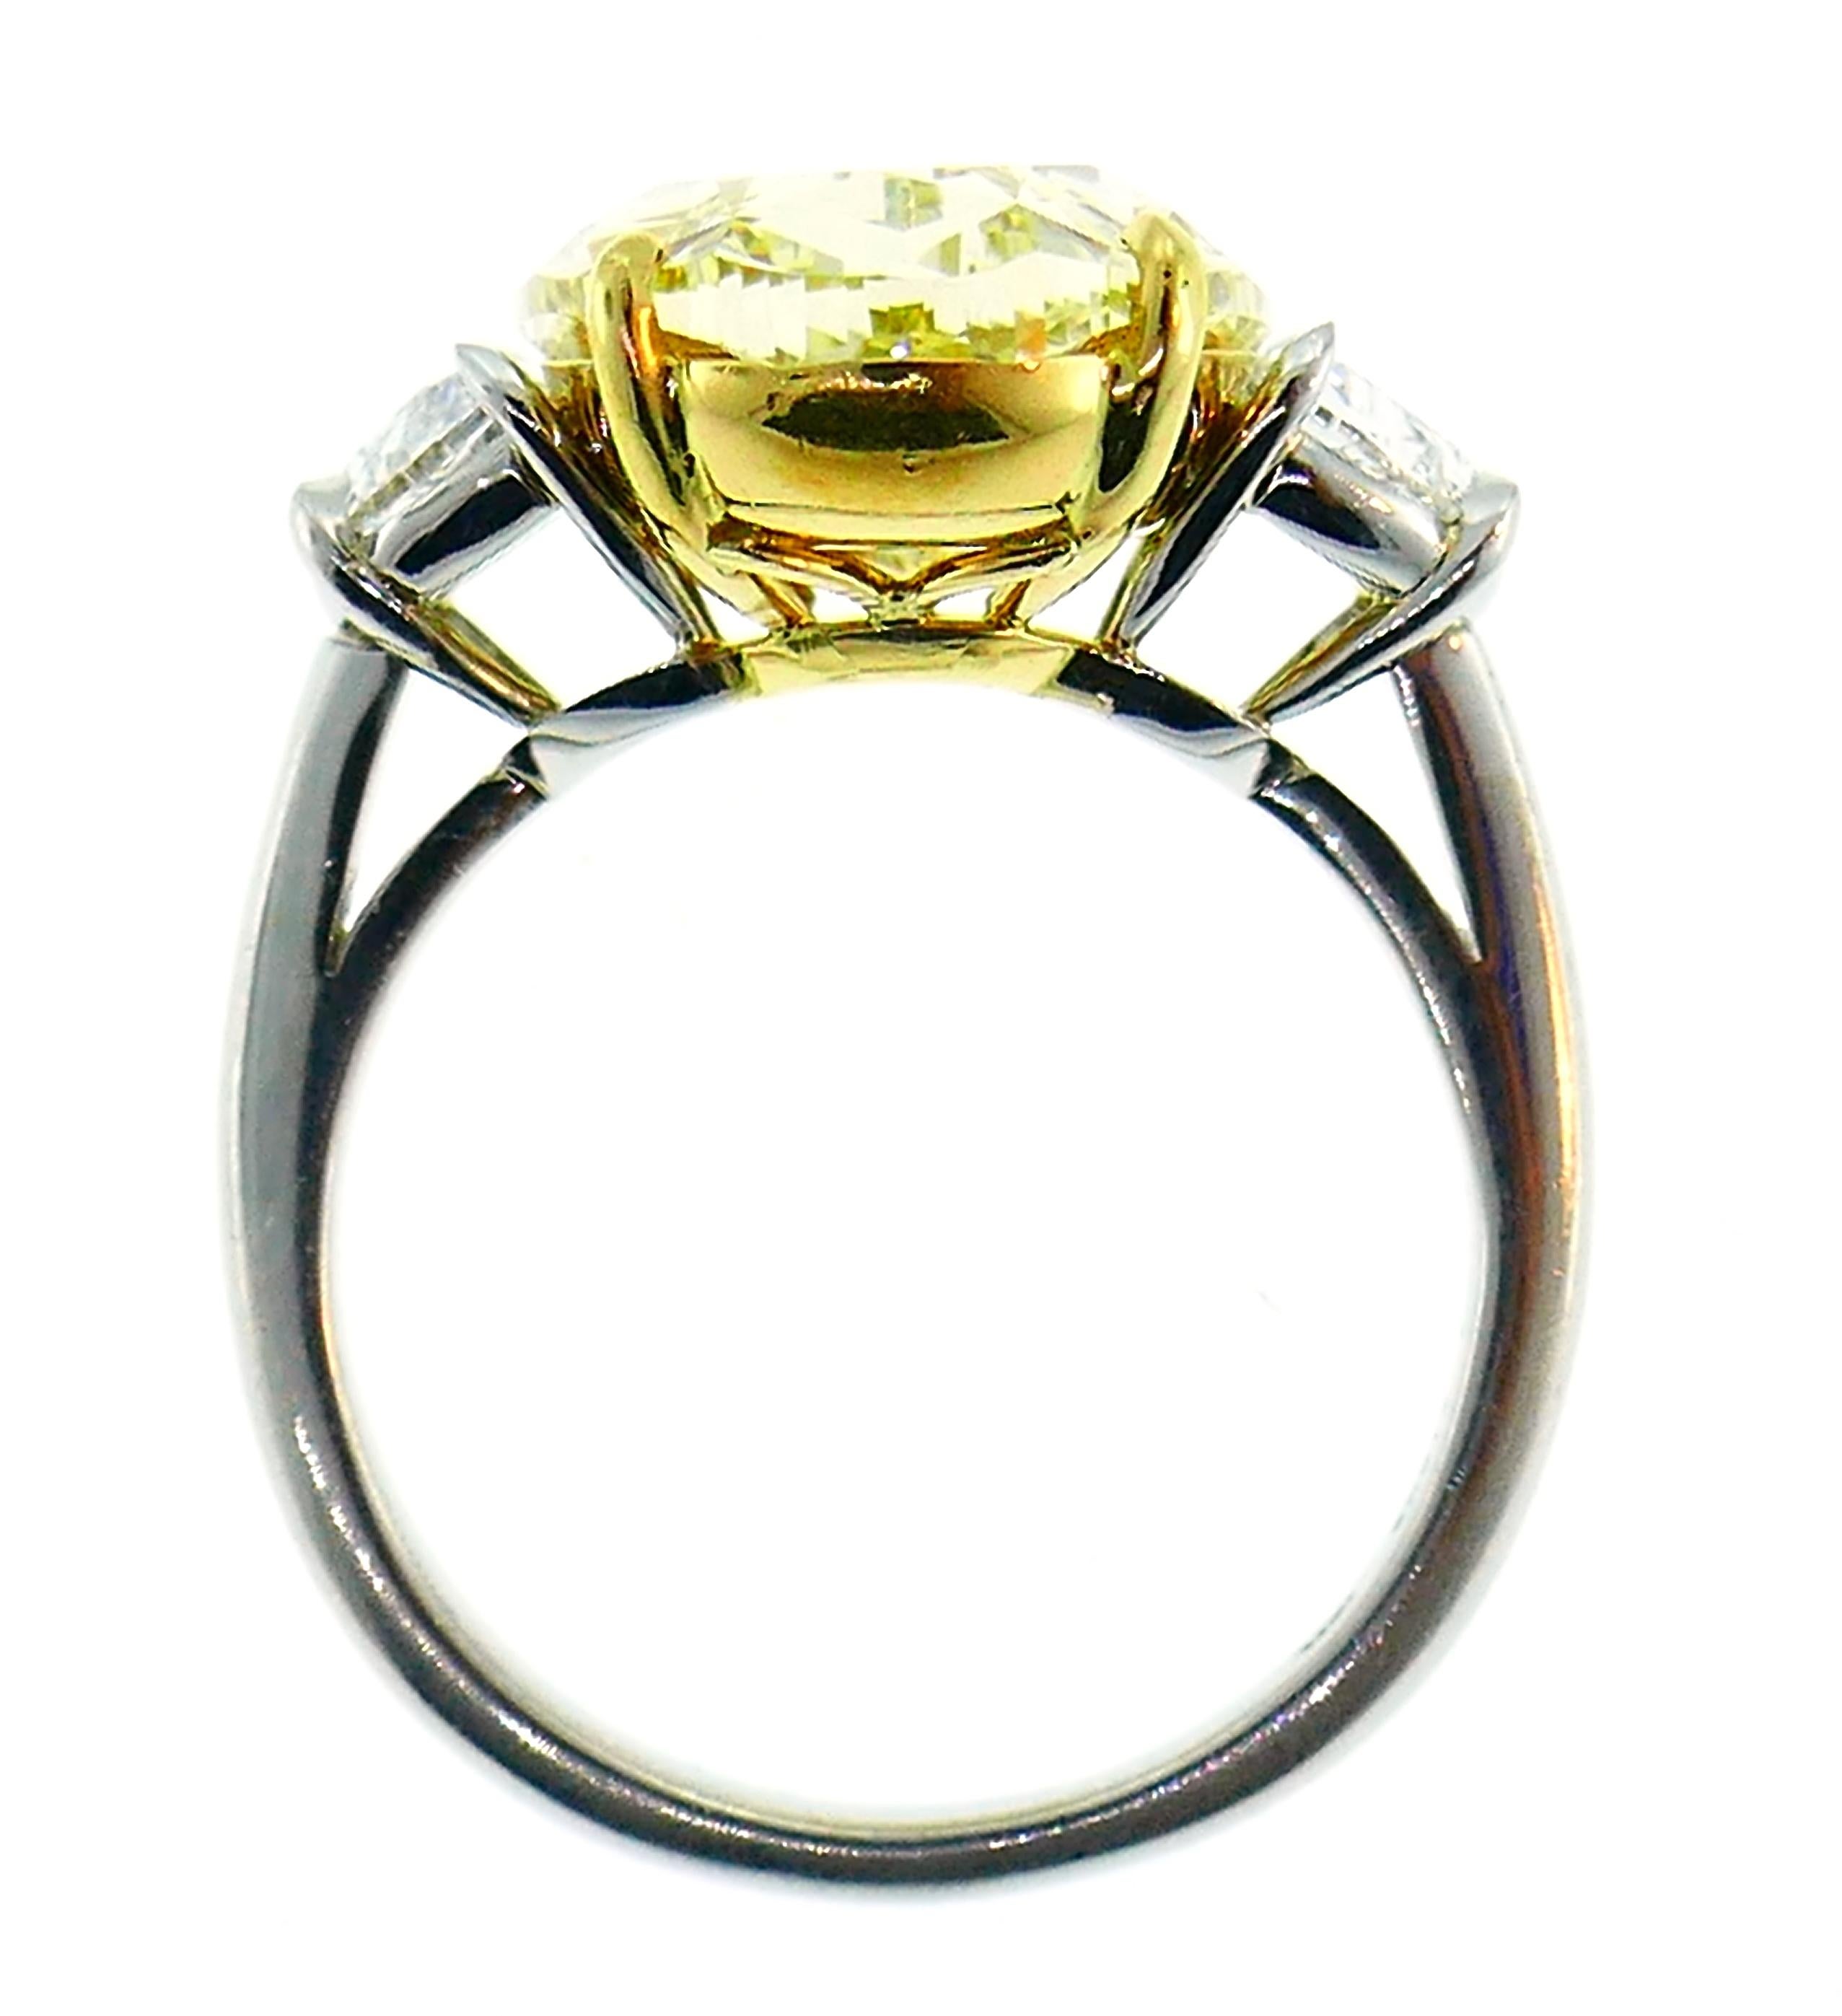 8.47 Carat Fancy Yellow Diamond GIA Platinum Ring Solitaire For Sale 3